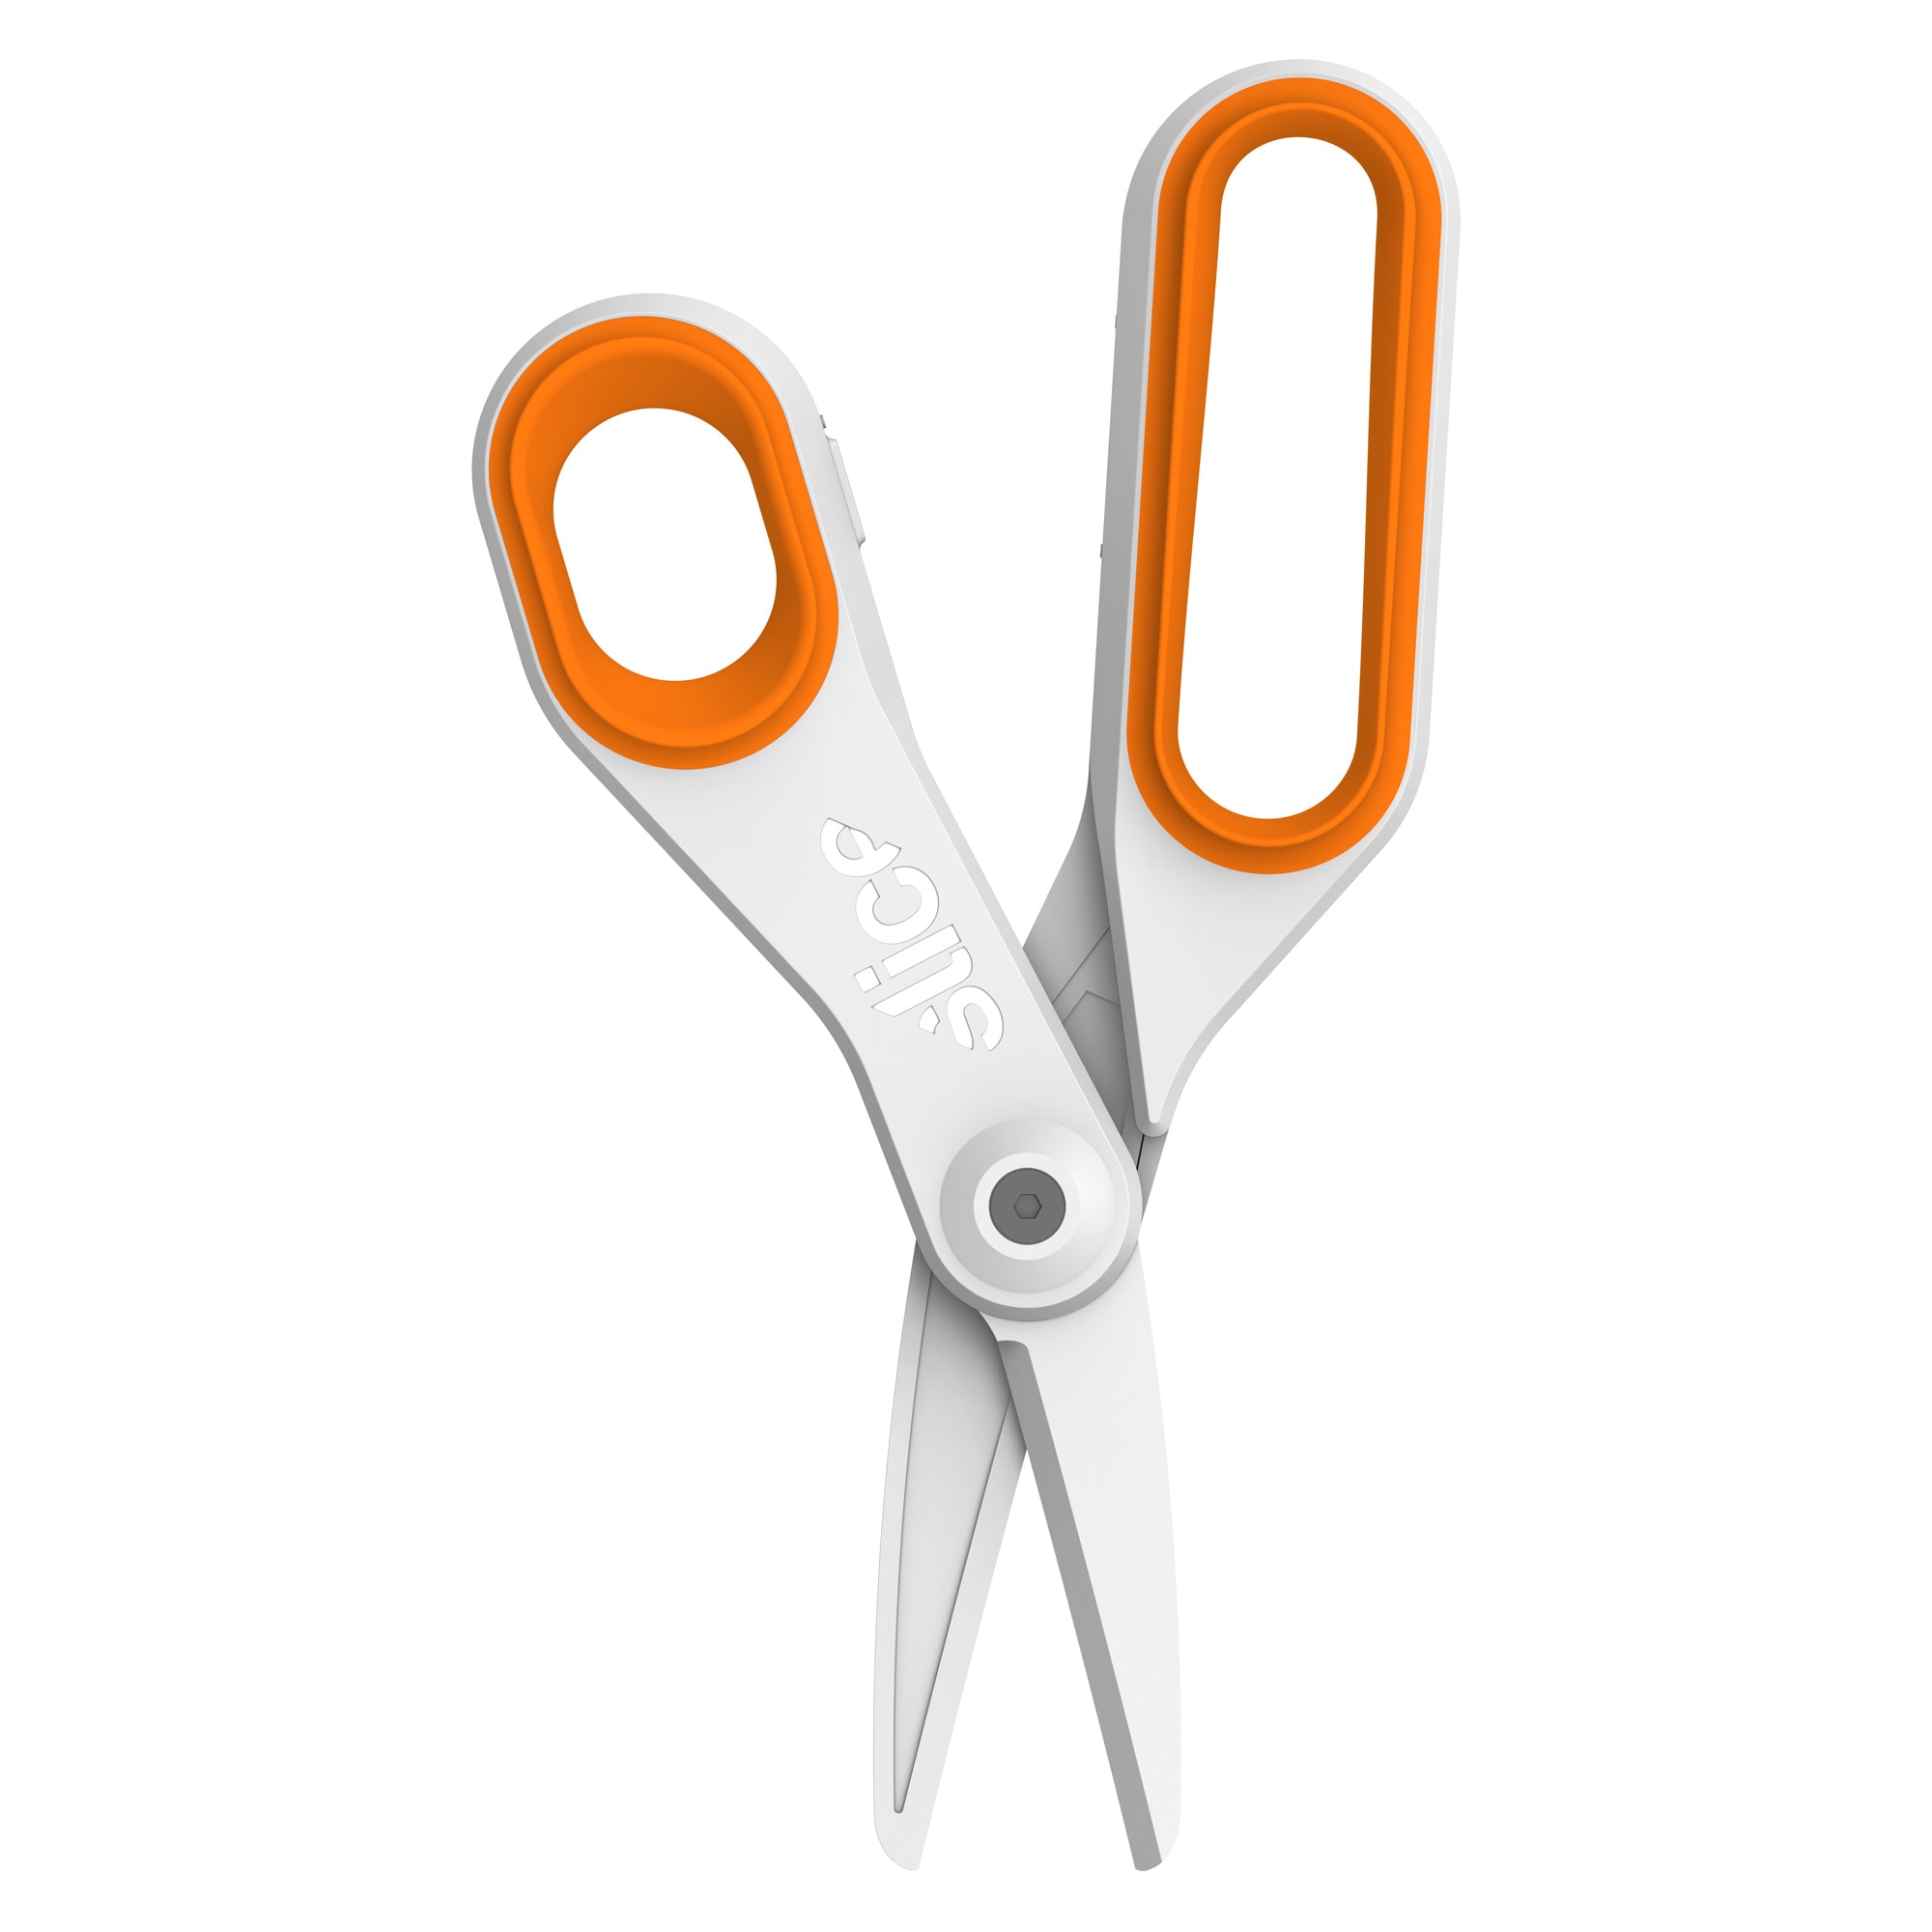 Scotch Soft Touch Pointed Kids Scissors, 5 Inches, Stainless Steel